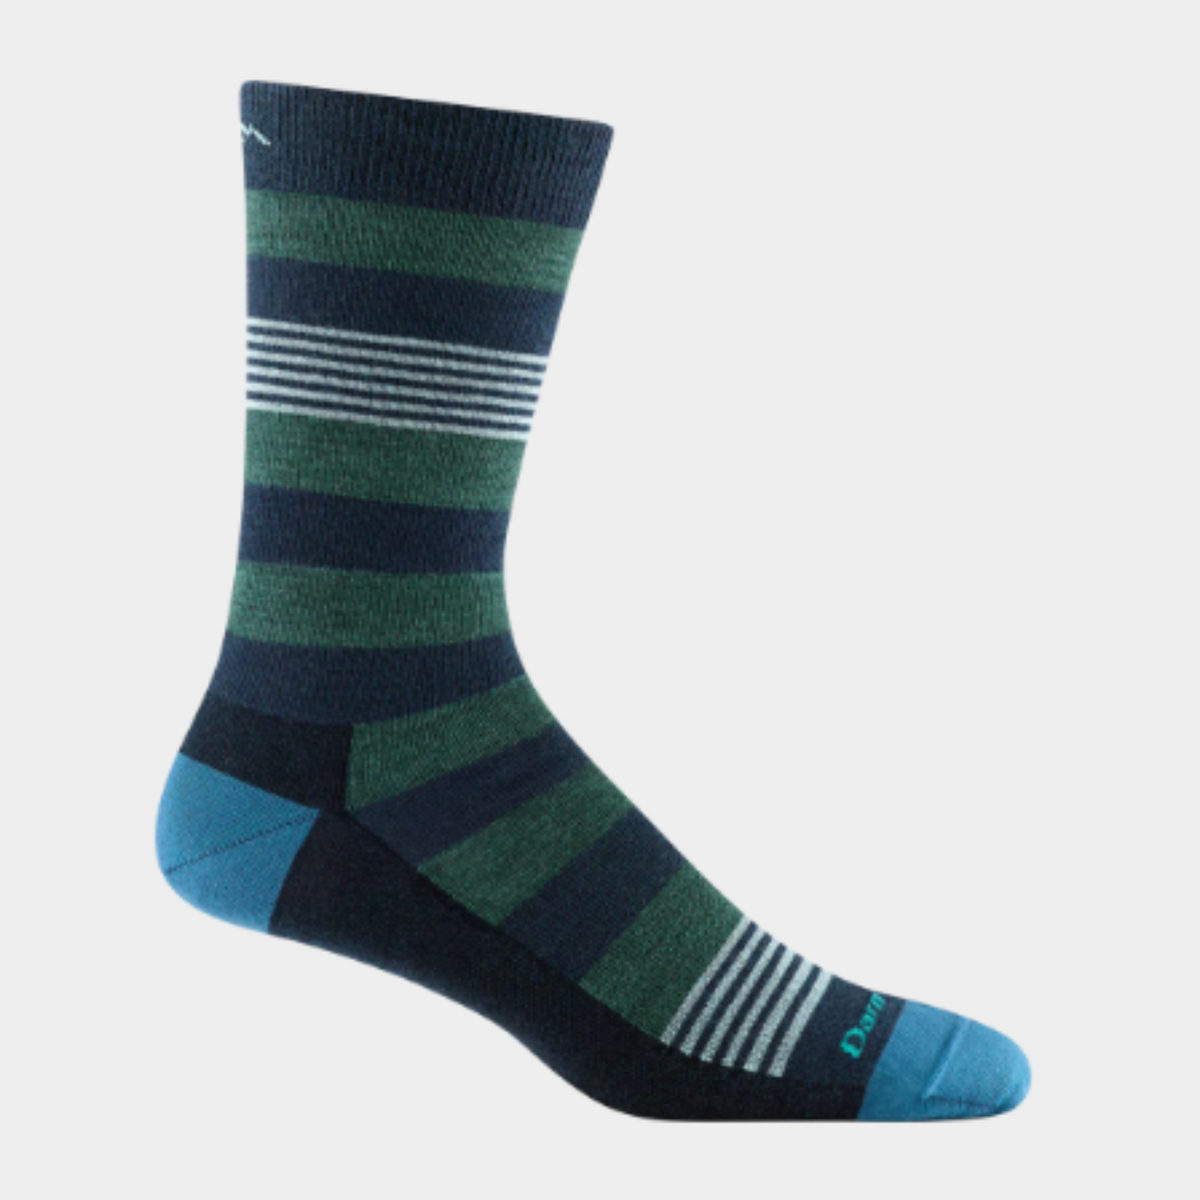 Darn Tough 6033 Oxford Crew Lightweight men&#39;s sock in eclipse featuring blue and green stripes